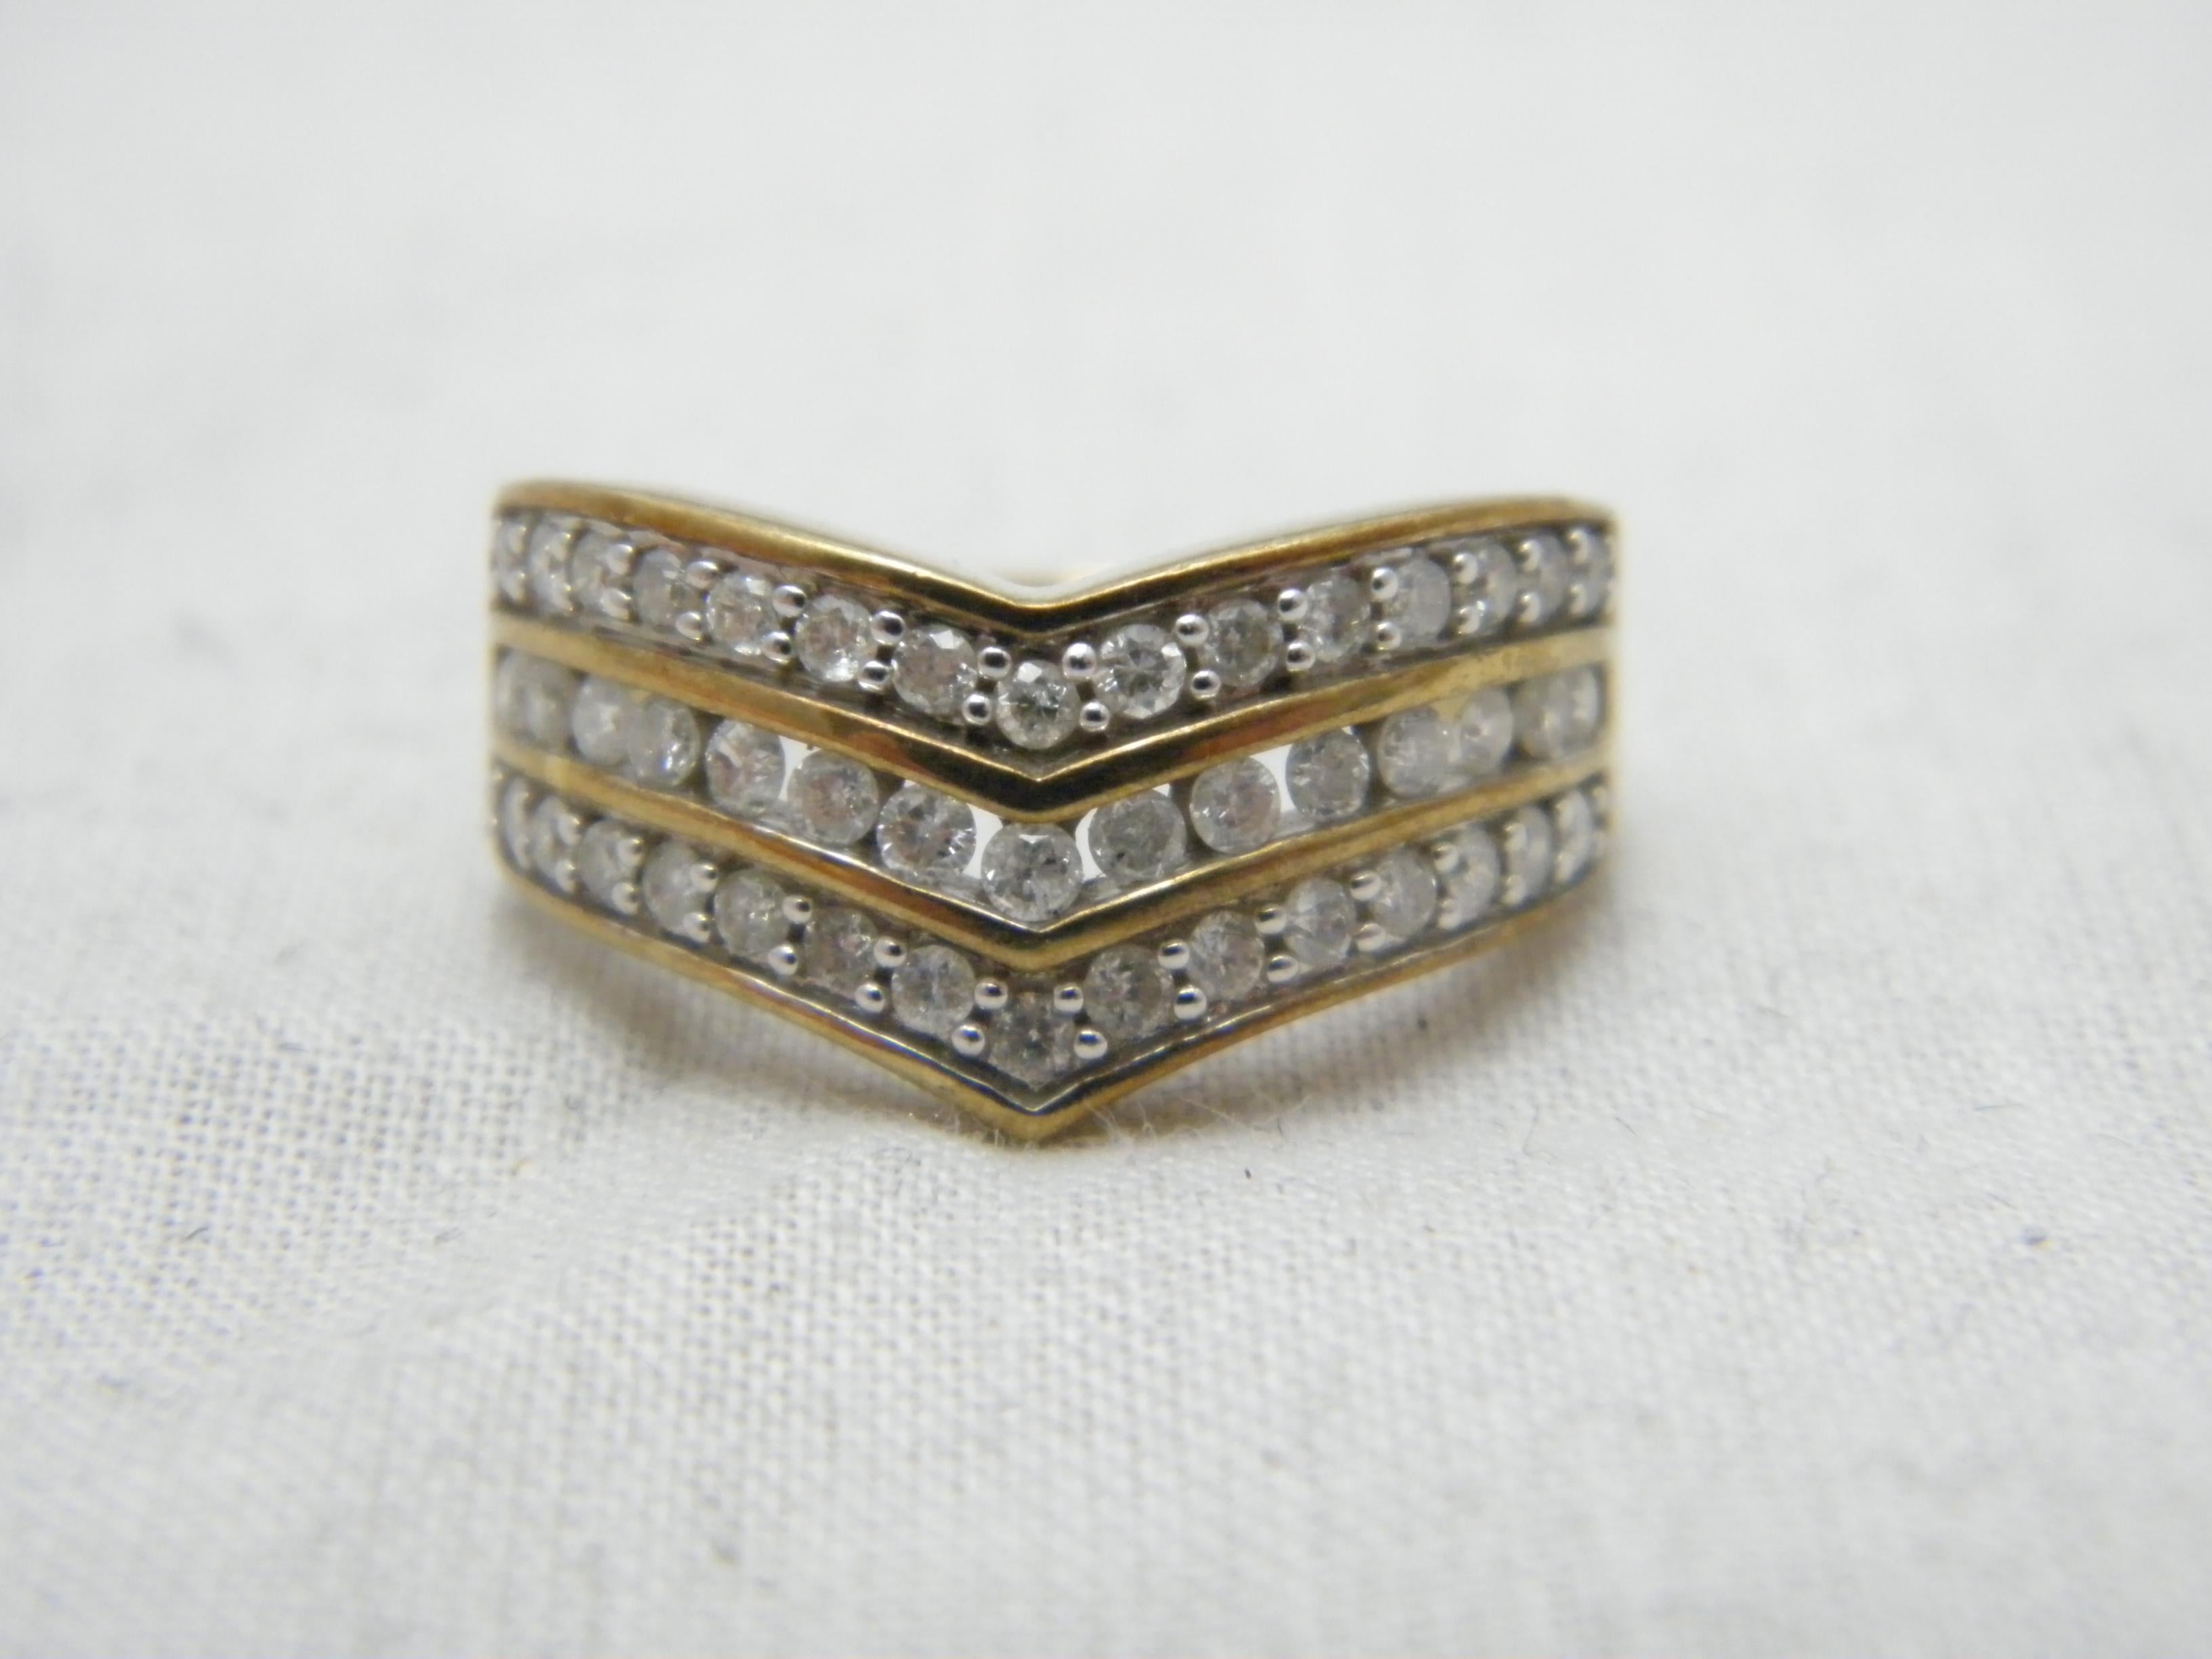 Vintage 9ct Gold 1.25 Cttw Diamond Wishbone Keeper Ring 375 Purity In Good Condition For Sale In Camelford, GB